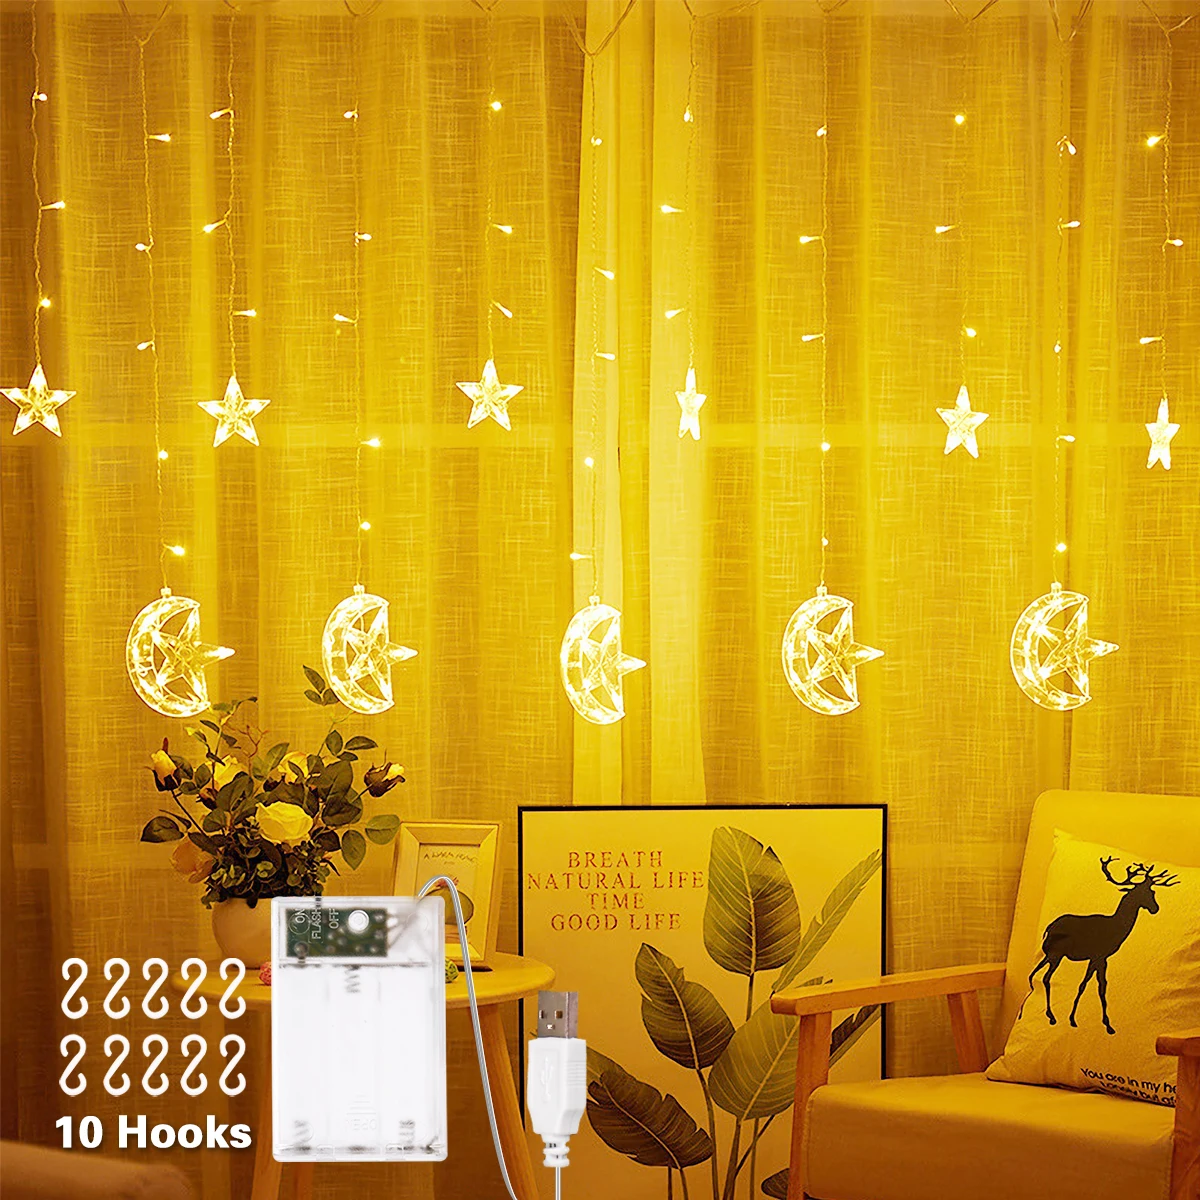 2.5M Fairy Lights with 10 Moon & Star String Lights 225LEDs Battery or USB Powered LED Curtain Lights for Indoor Bedroom Decor